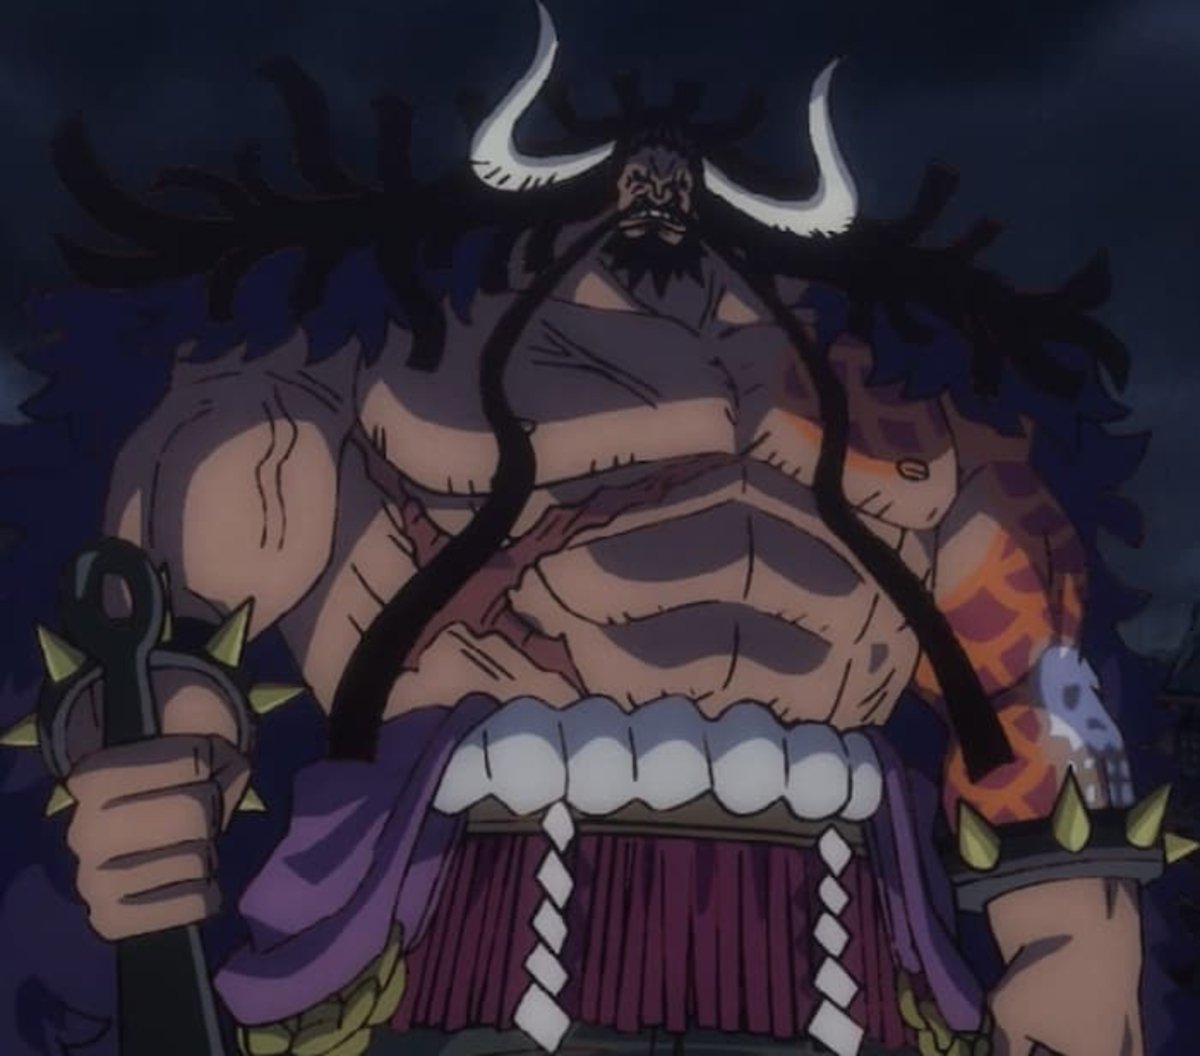 Kaido had great respect for opponents who gave him a good fight, revealing his honor as a pirate.